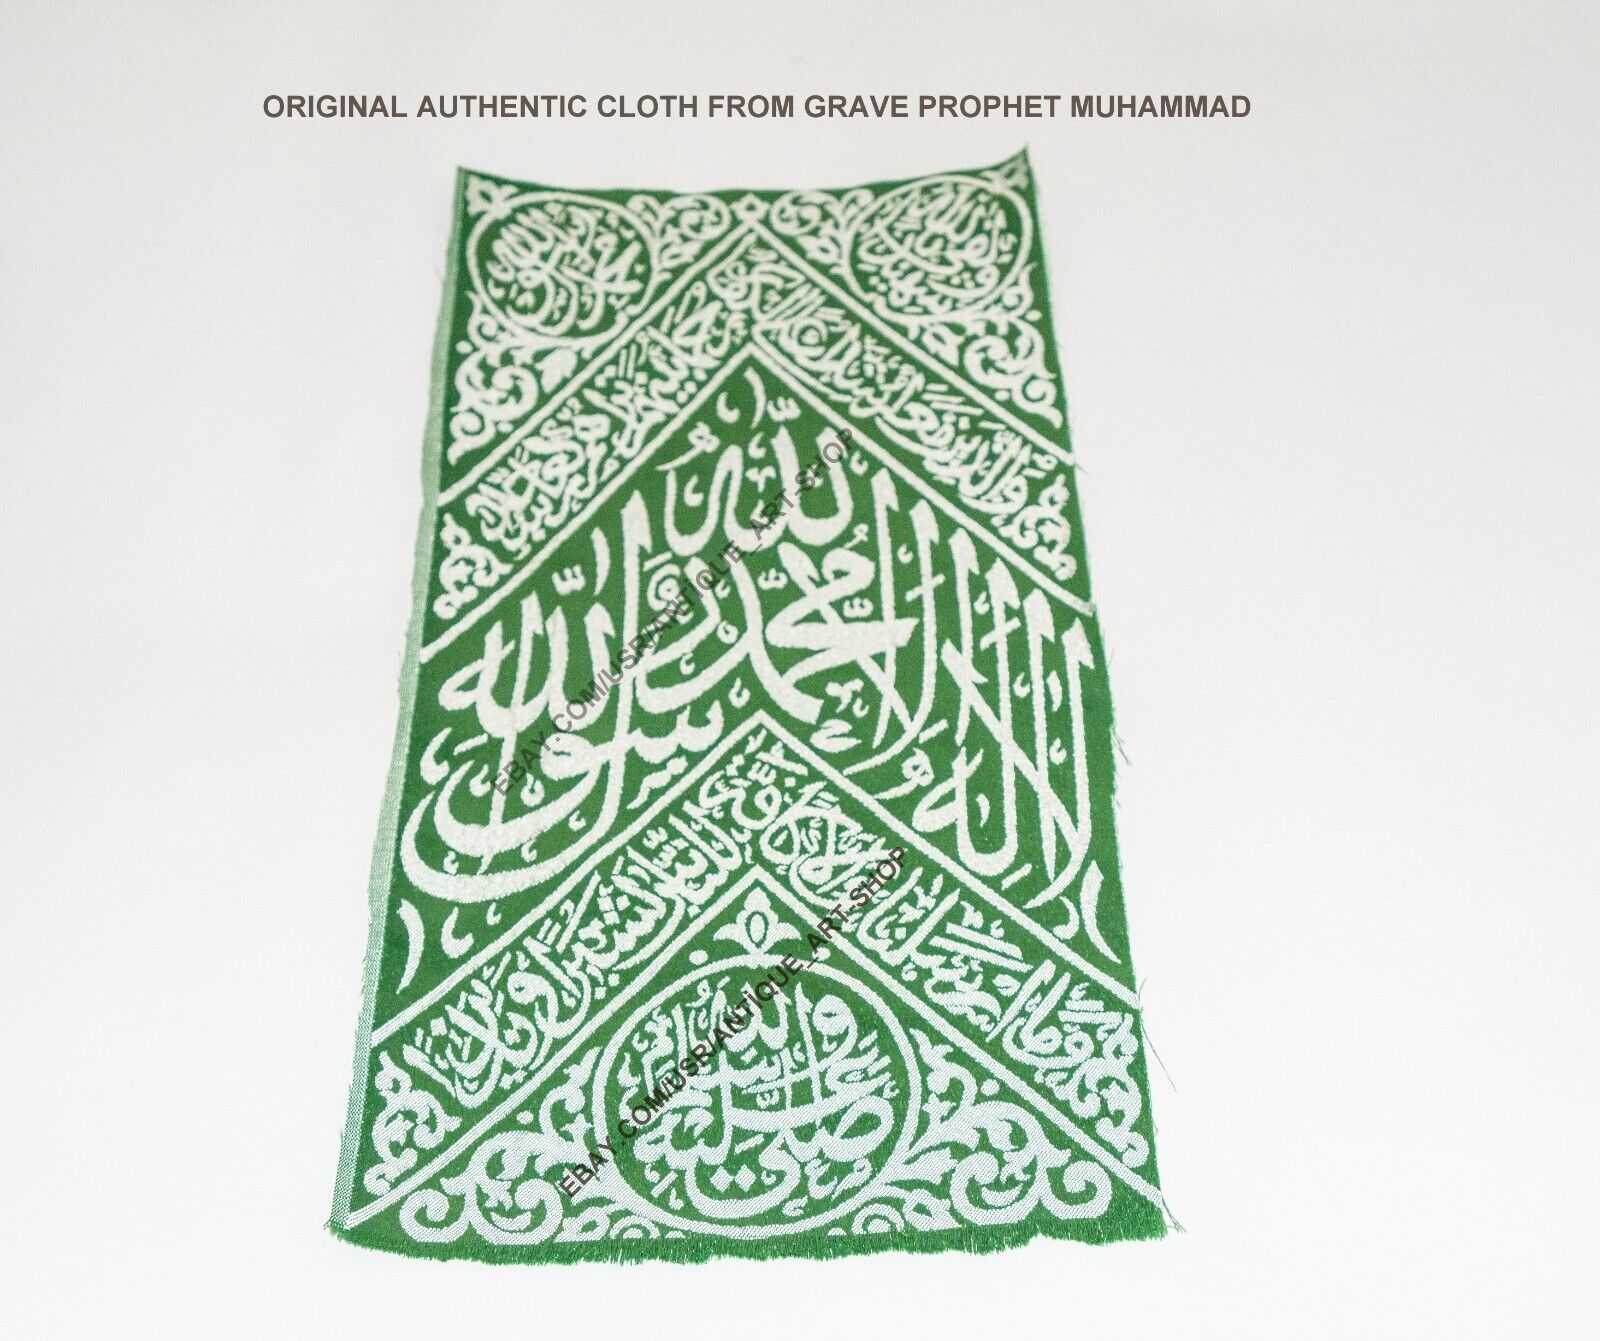 AUTHENTIC  CLOTH  FROM GRAVE CHAMBER  PROPHET MUHAMMAD